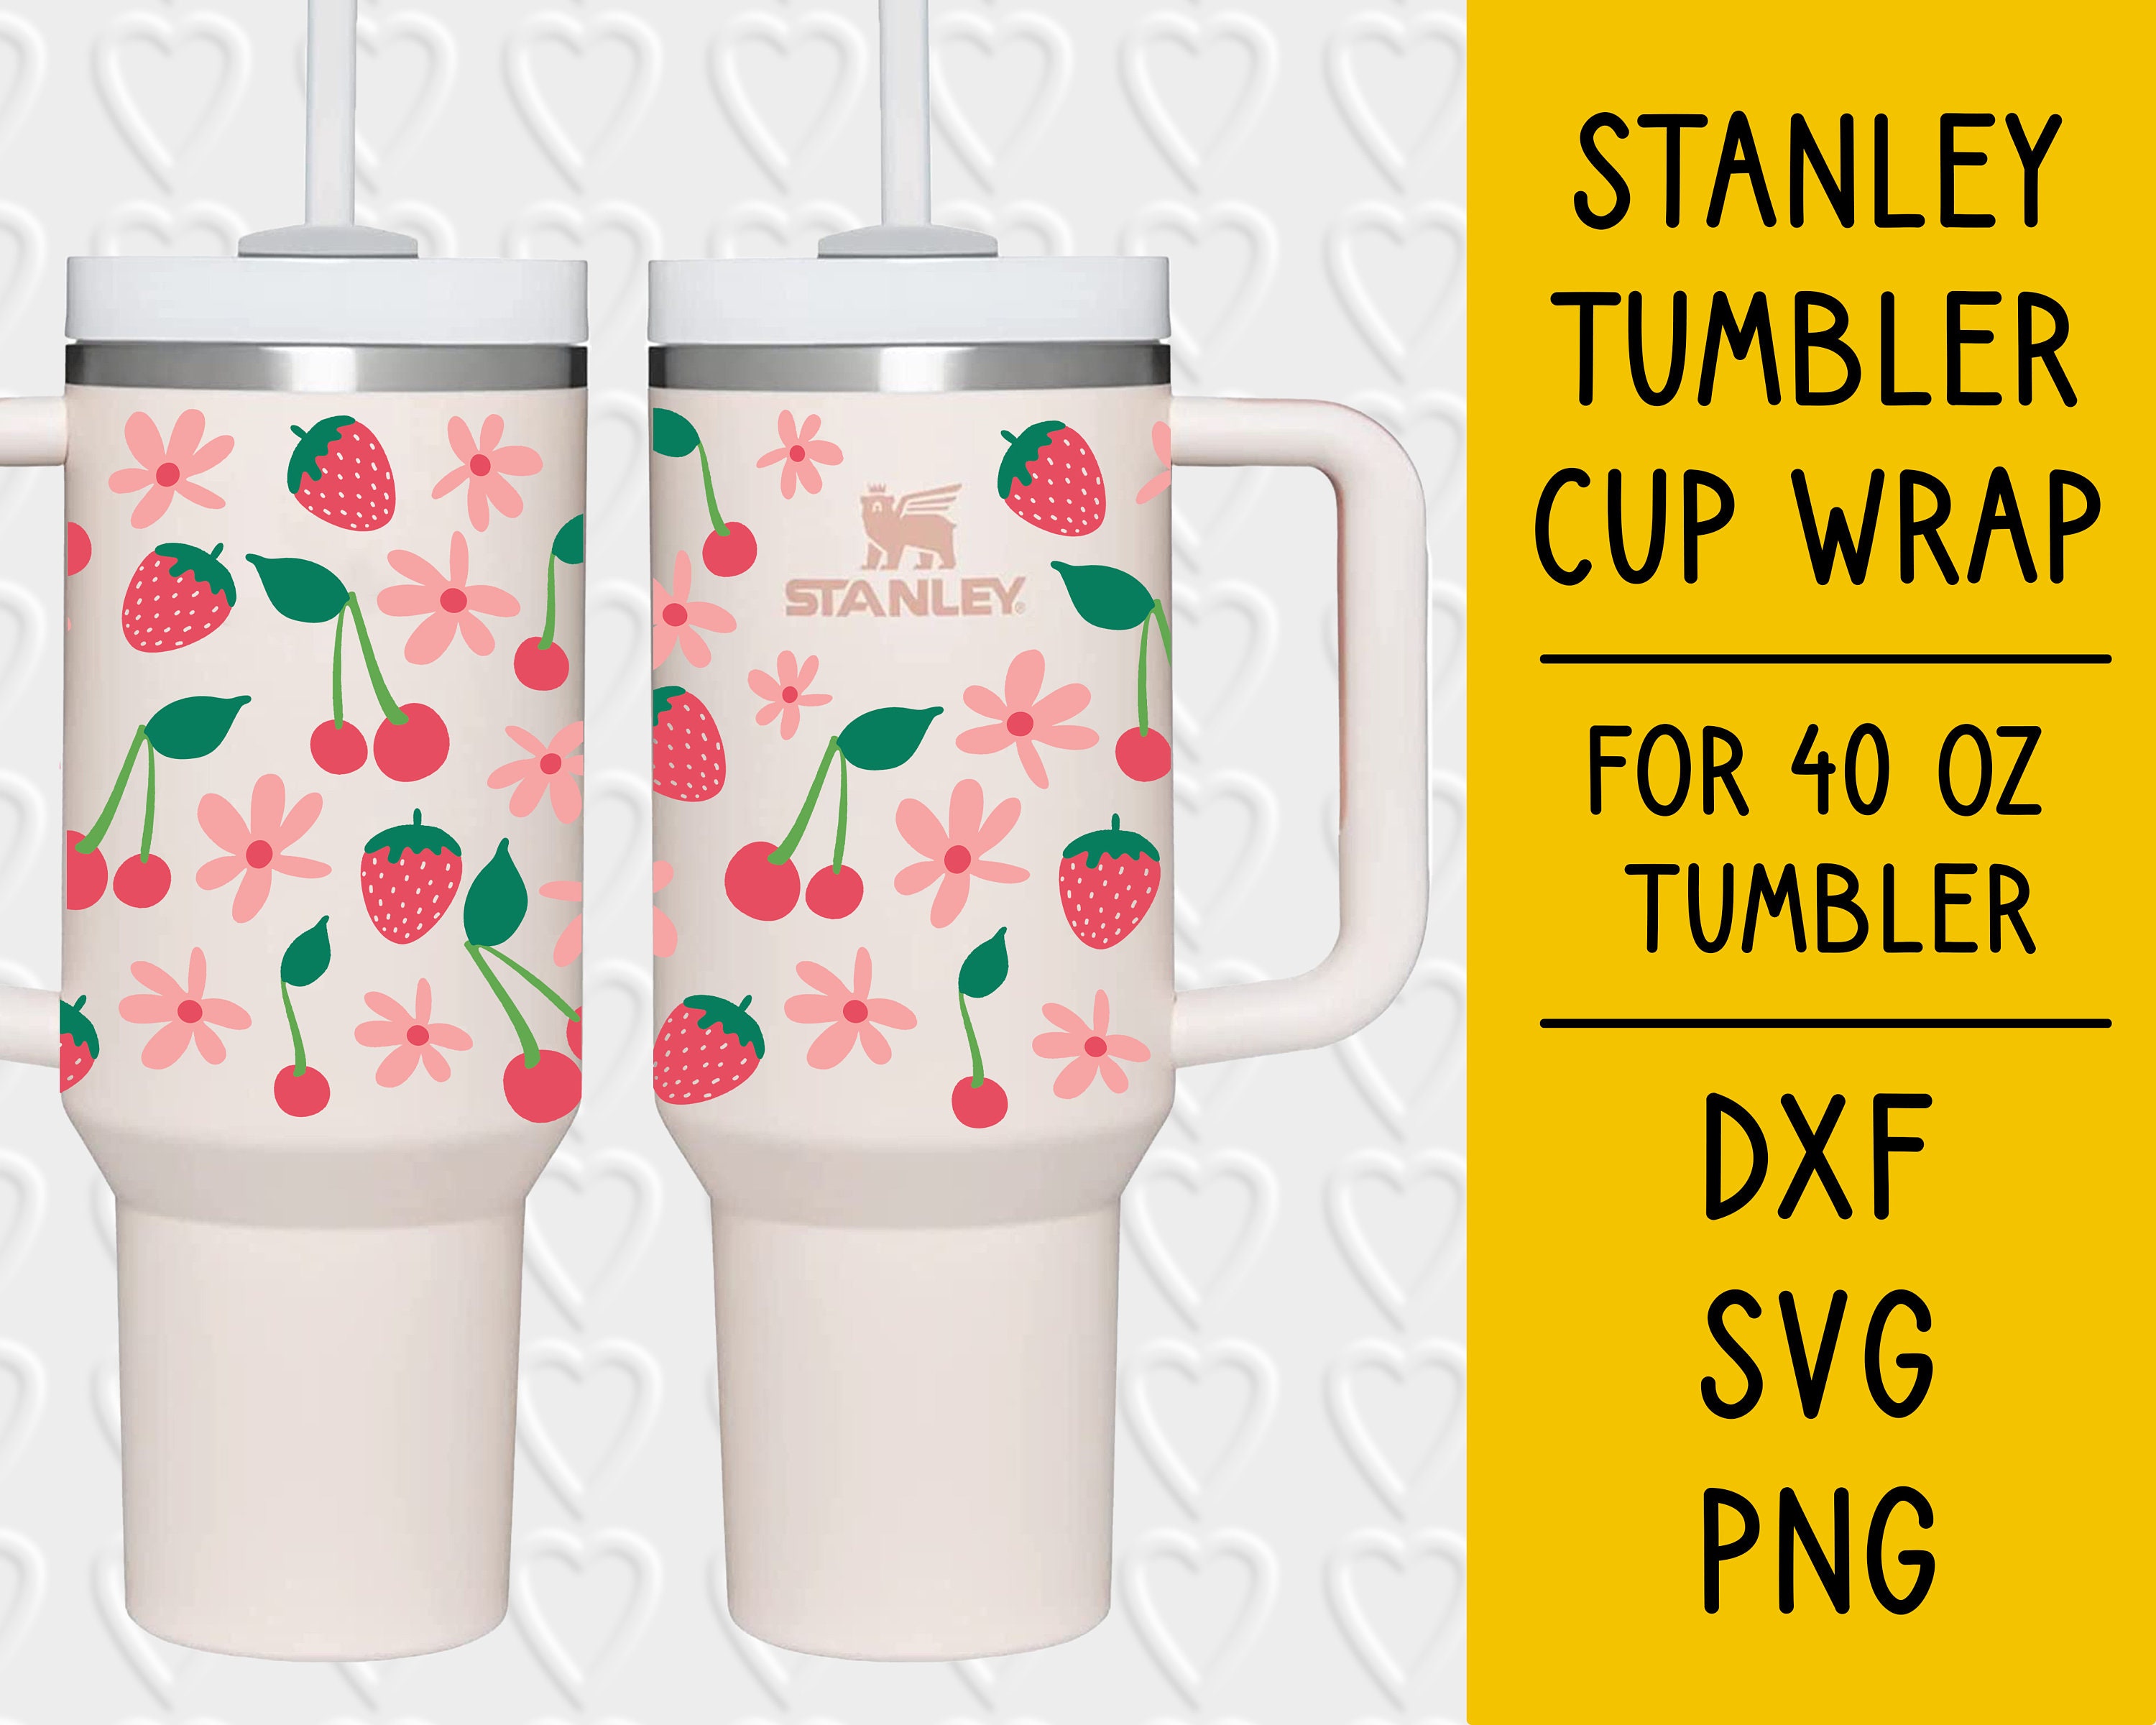 Stanley 40 Oz Tumbler Cup Wrap Strawberries, Cherries, and Flowers Digital  Cut File PNG SVG DXF Pre-sized With Commercial License 